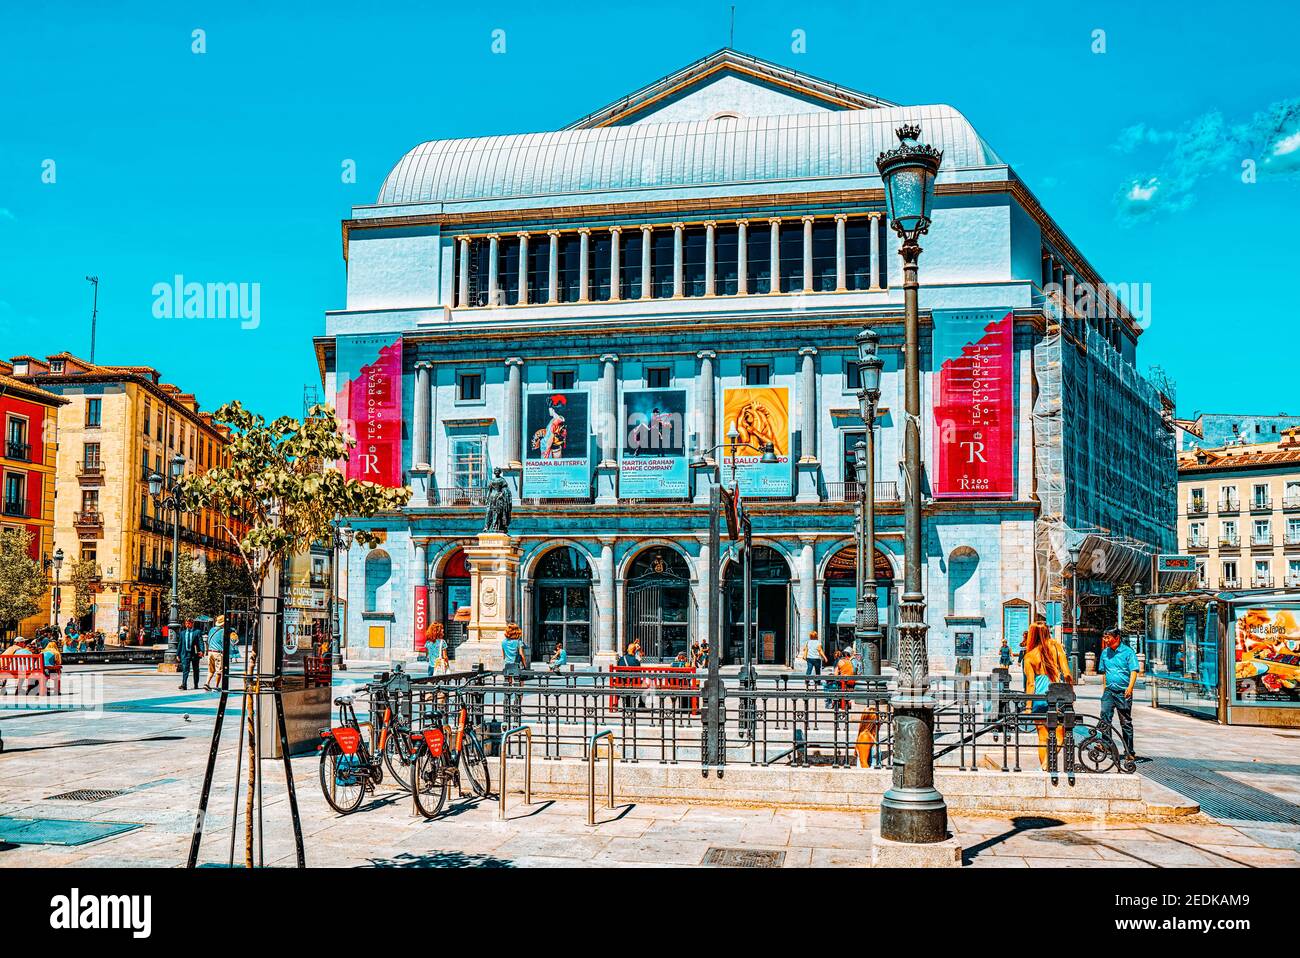 Madrid, Spain- June 06, 2017: Plaza de Isabel II with tourists and people. Madrid-capital of Spain and one of the most beautiful cities in the world. Stock Photo